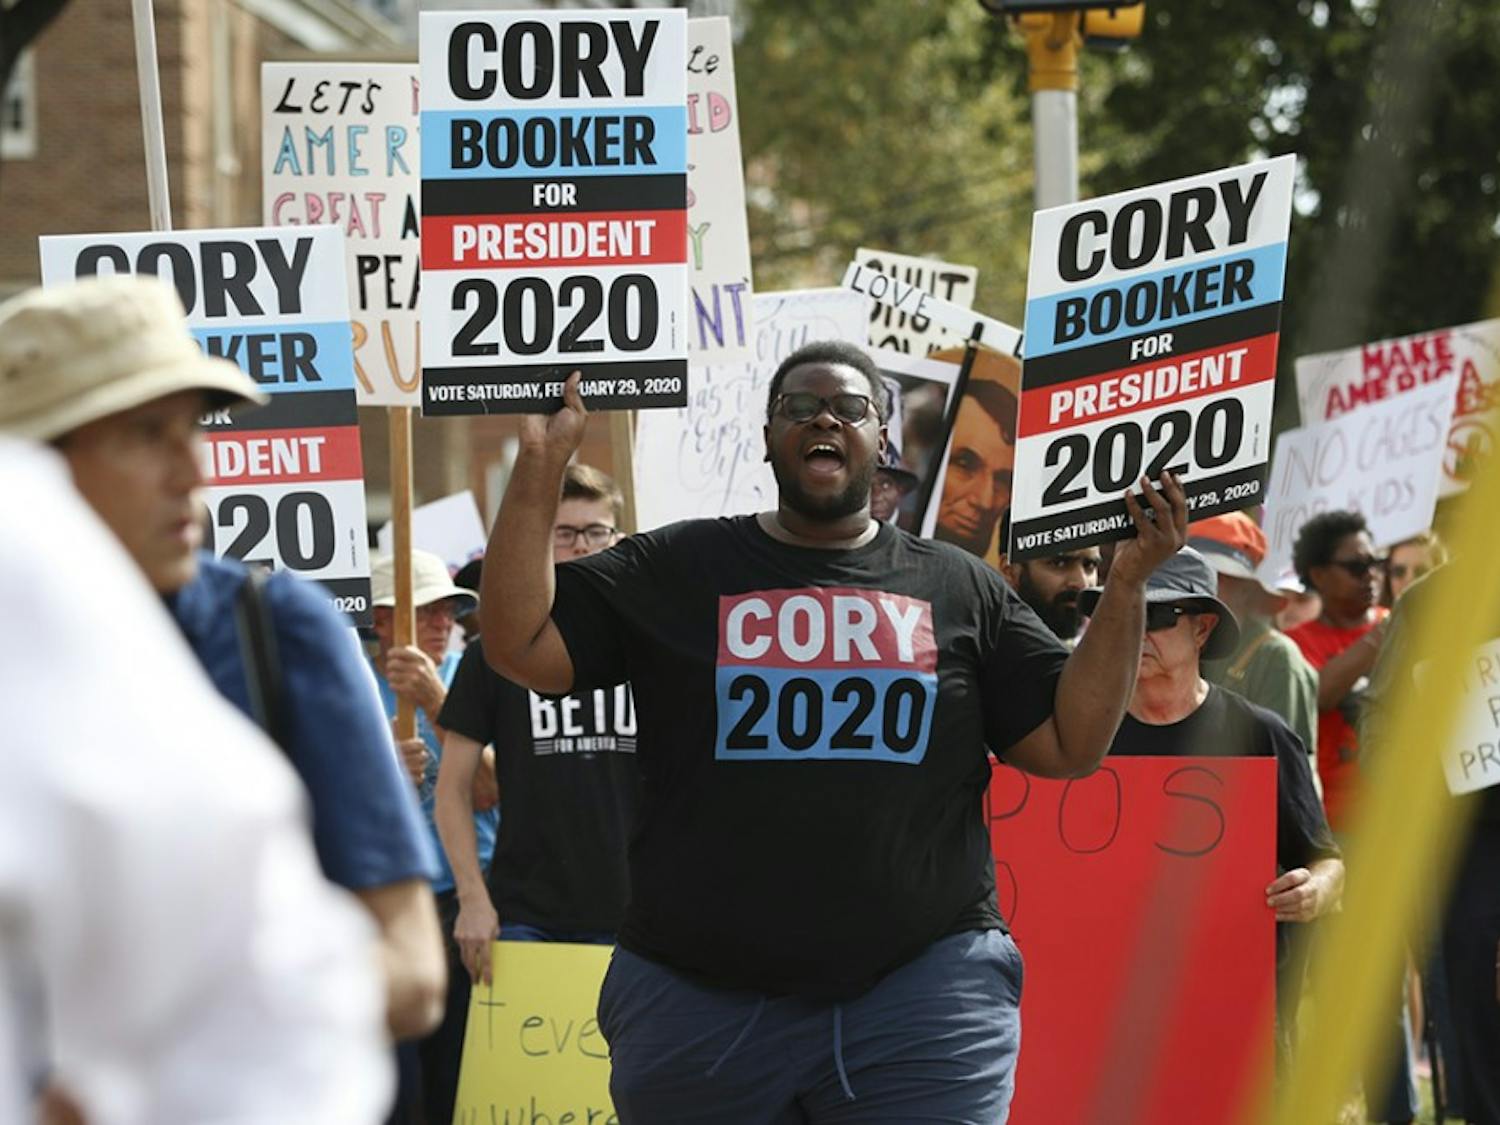 Protestors march with Cory Booker 2020 posters on their way to Benedict College on Oct. 25.&nbsp;